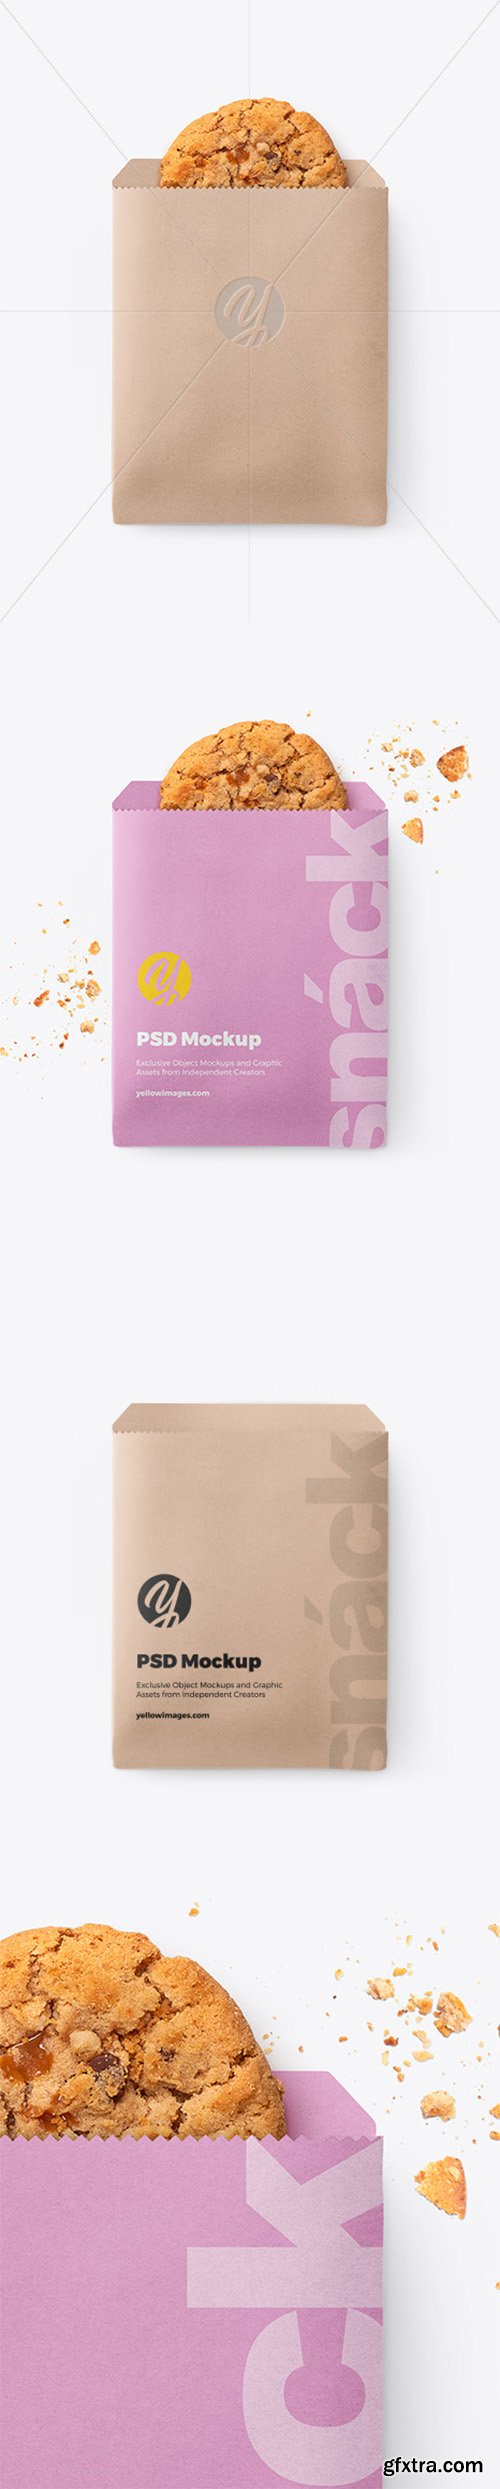 Paper Snack Pack Mockup 51866 Gfxtra